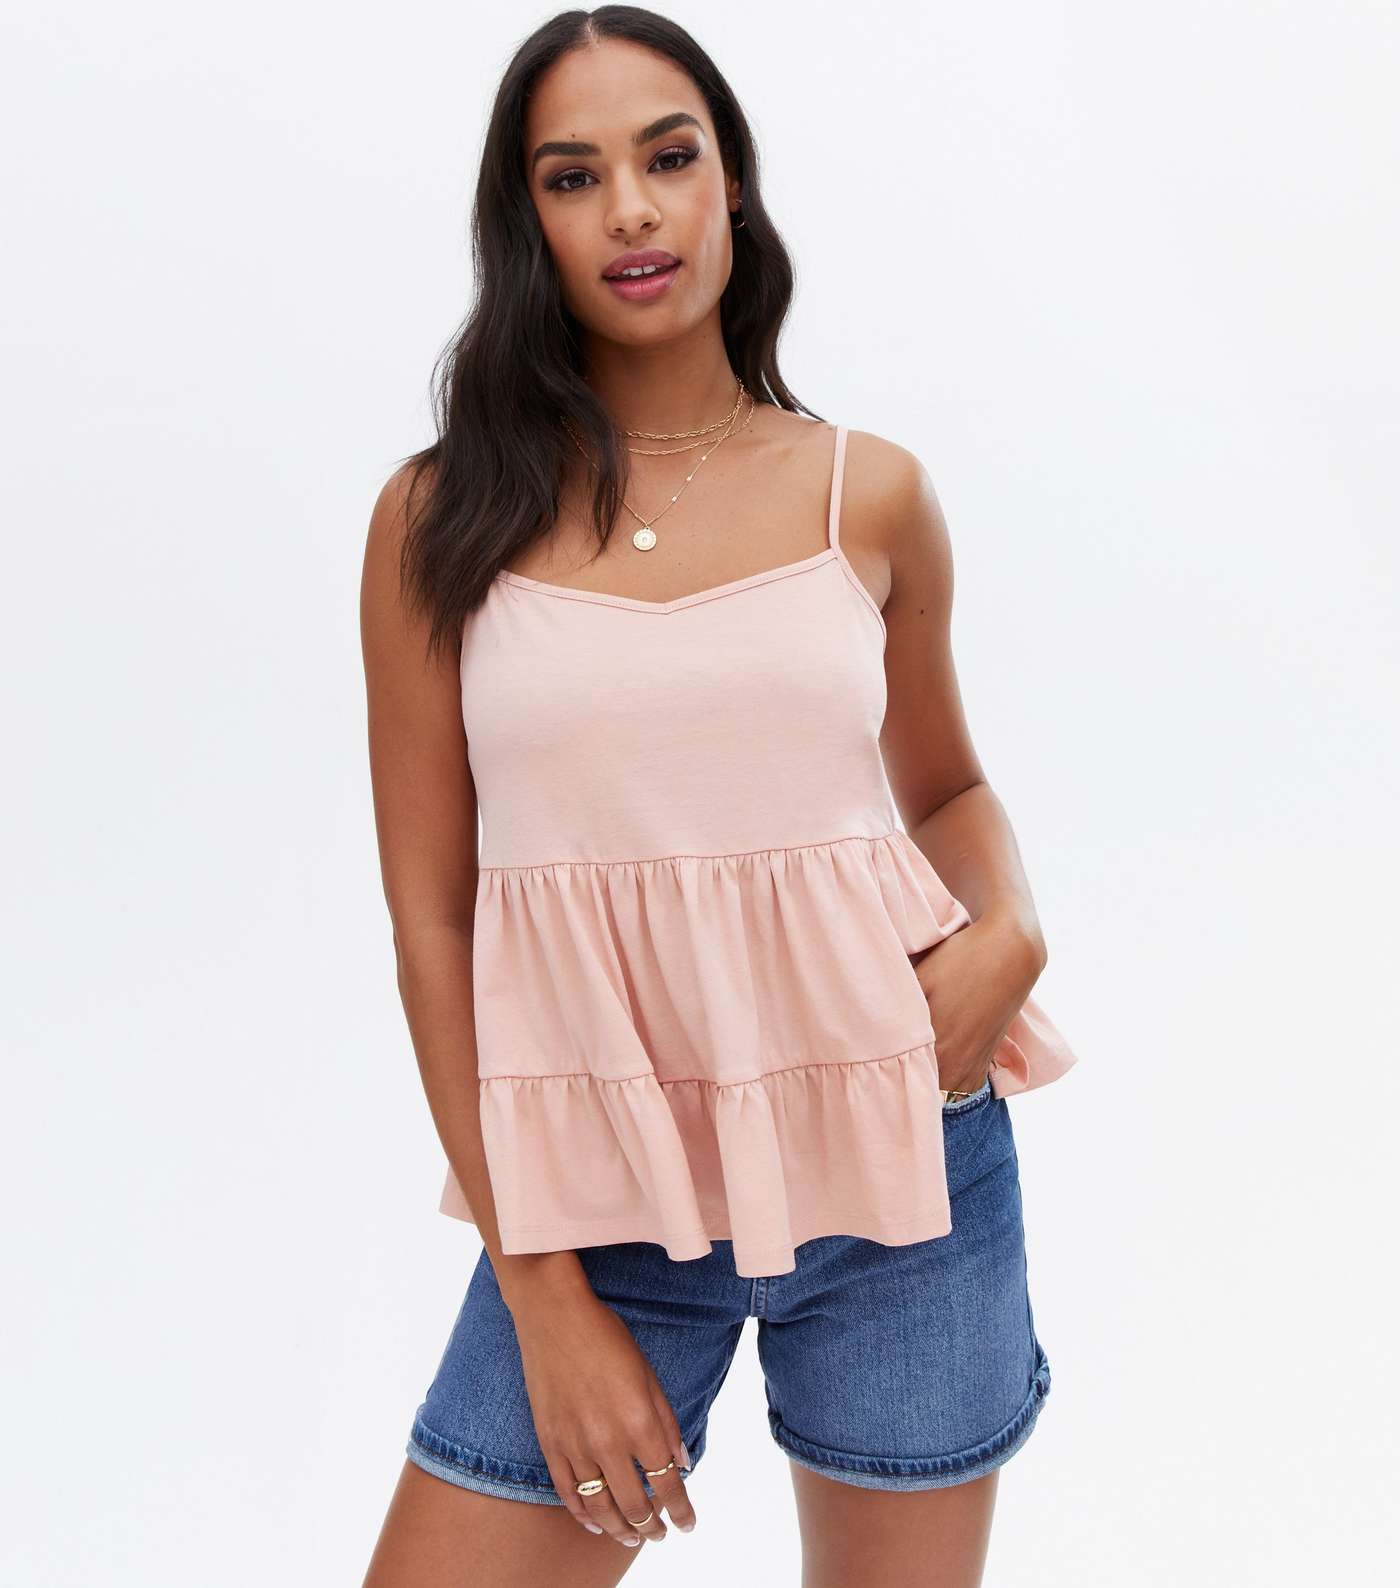 Pale Pink Double Peplum Cami